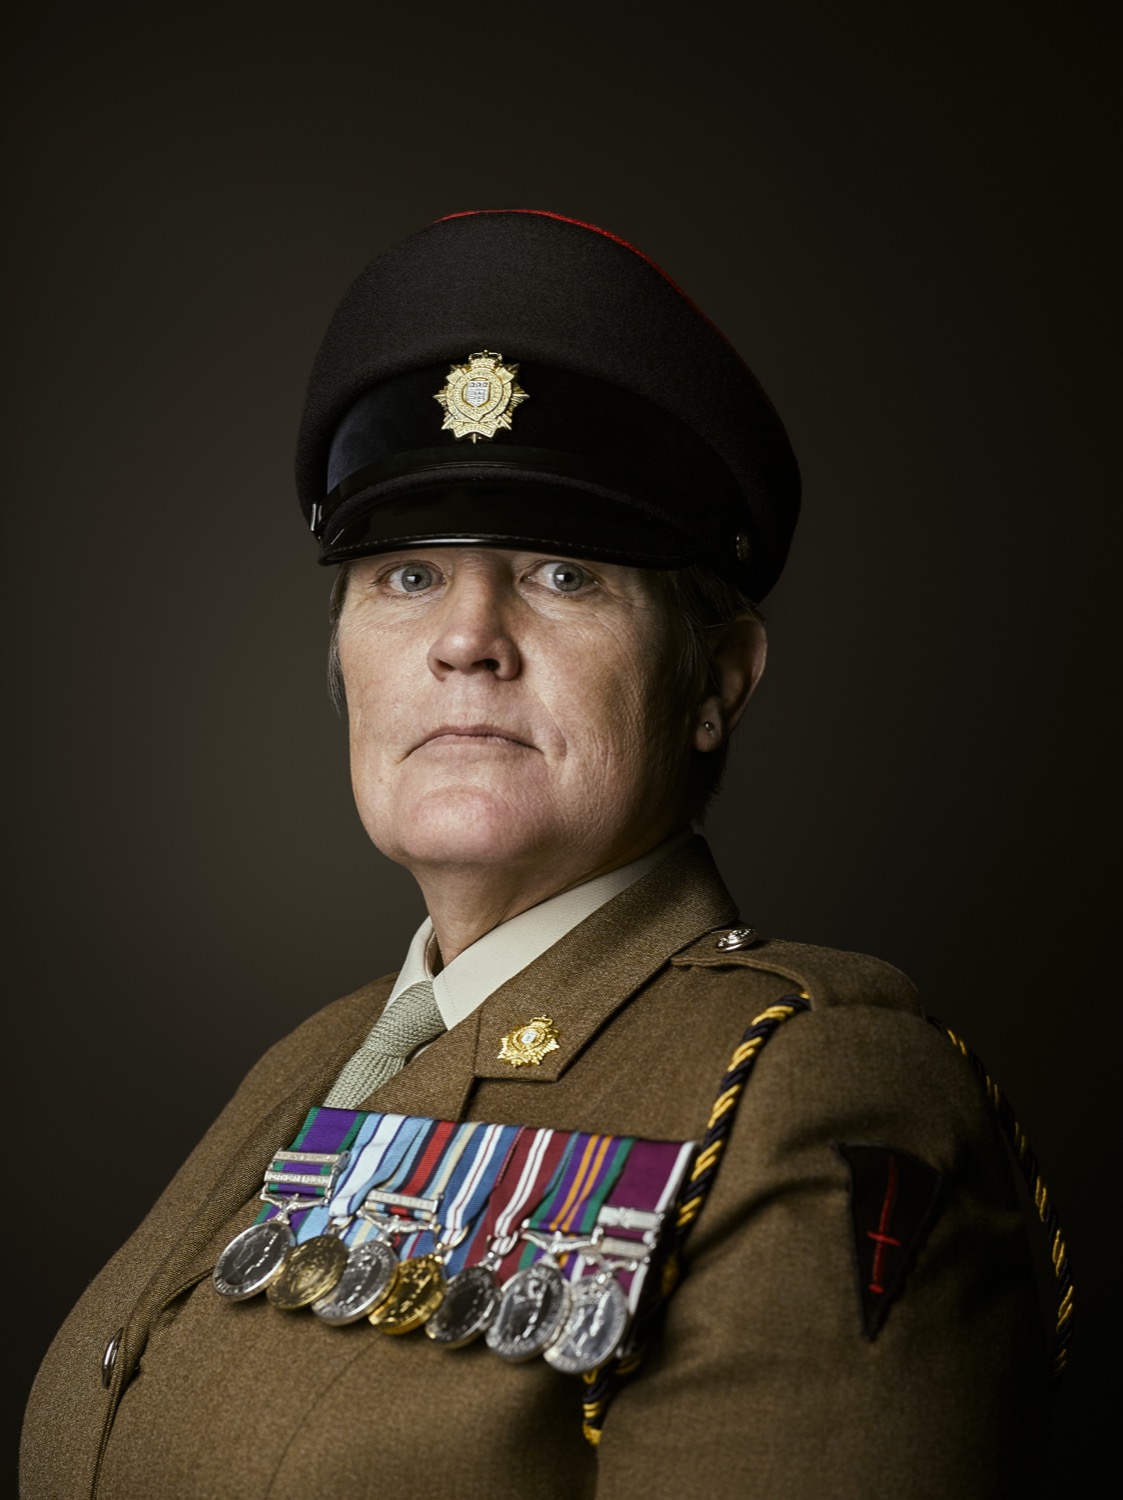 WO2 Deborah Penny Royal Logistic Corps (Rory Lewis Photographer) 2018 Transgender Army Portraits